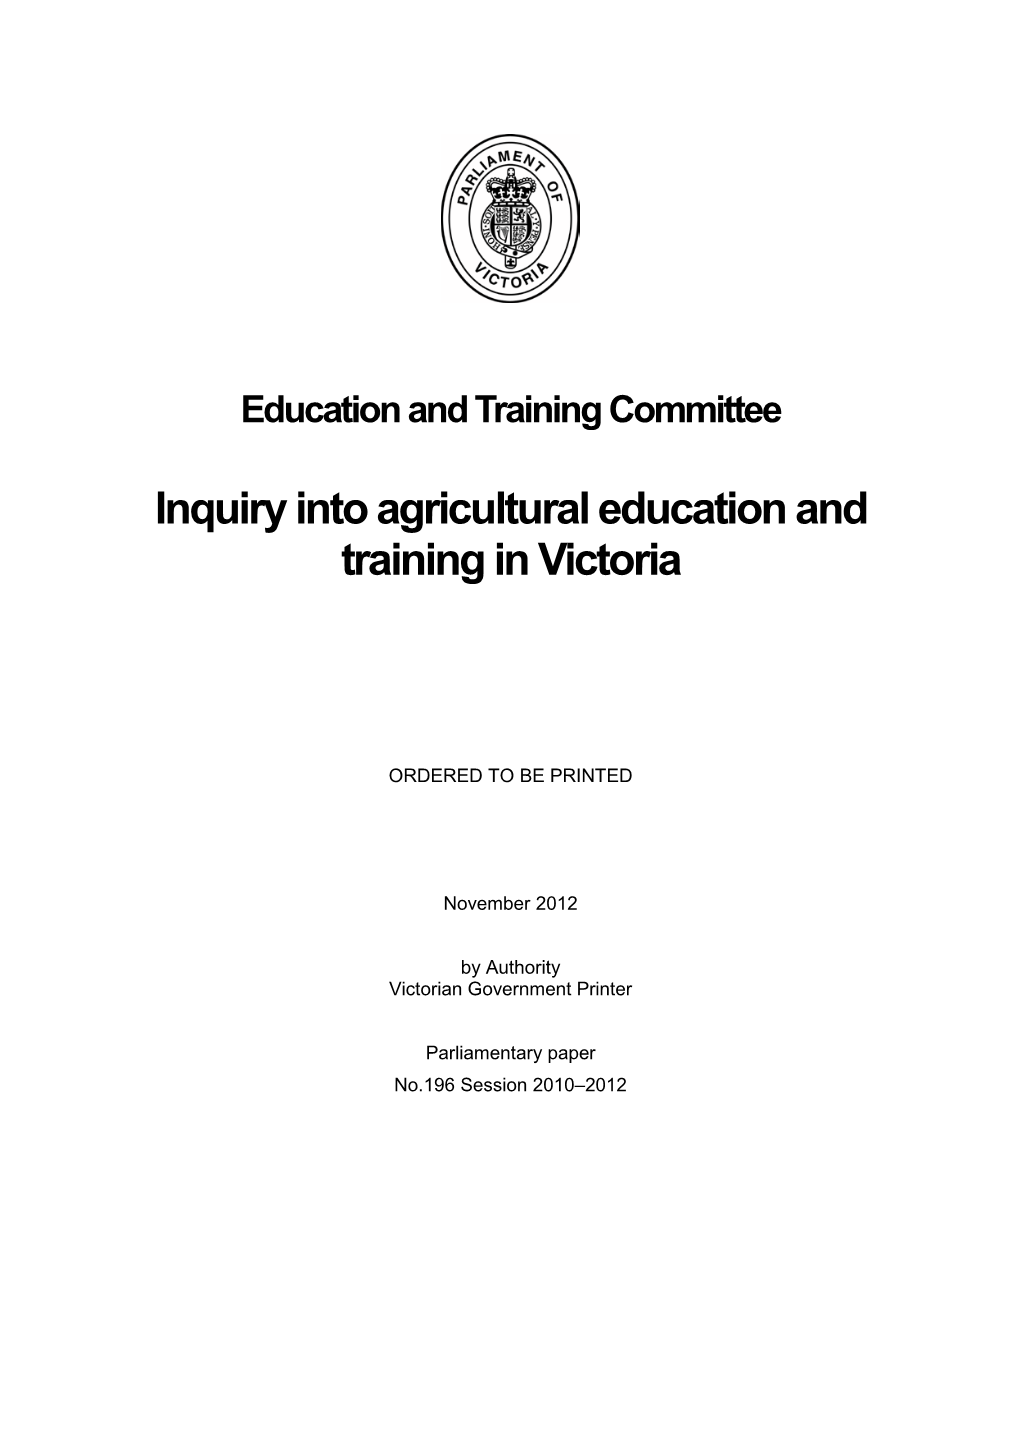 Inquiry Into Agricultural Education and Training in Victoria